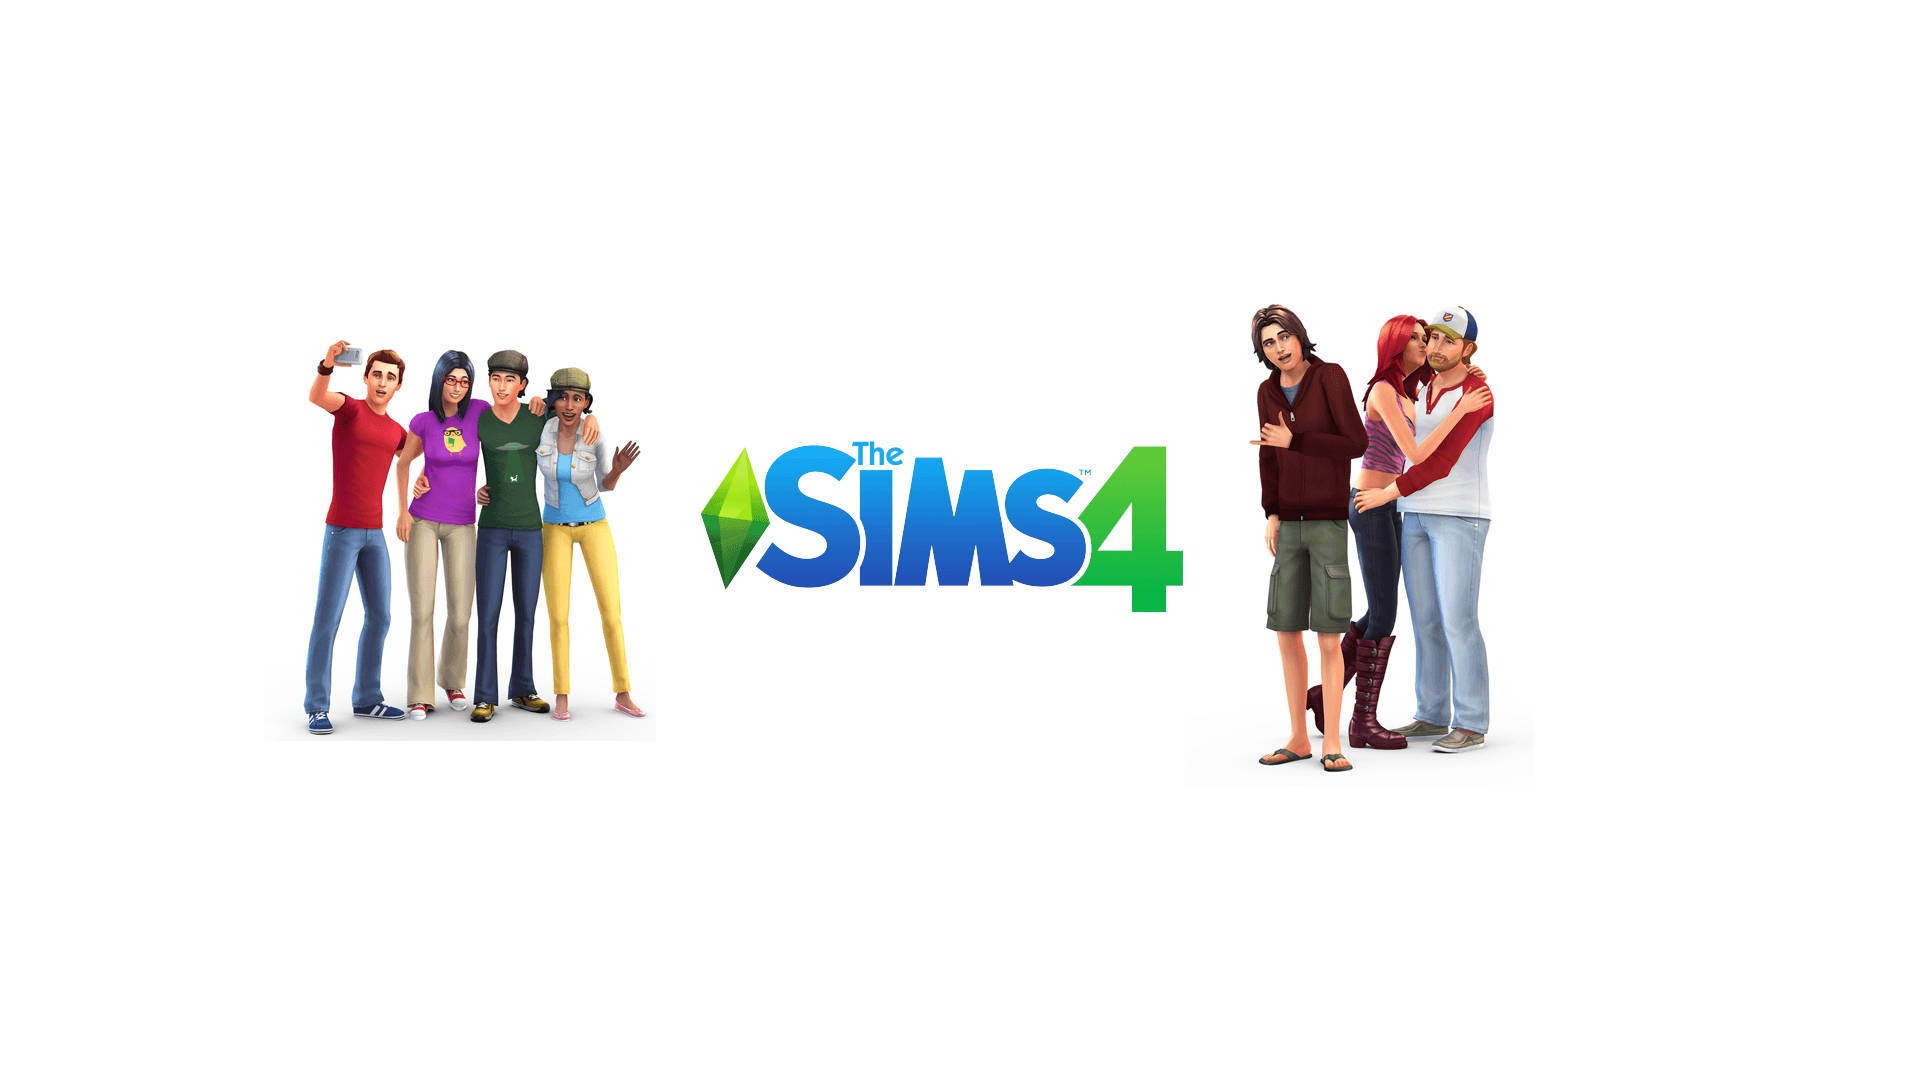 The Sims Characters Poster Picture